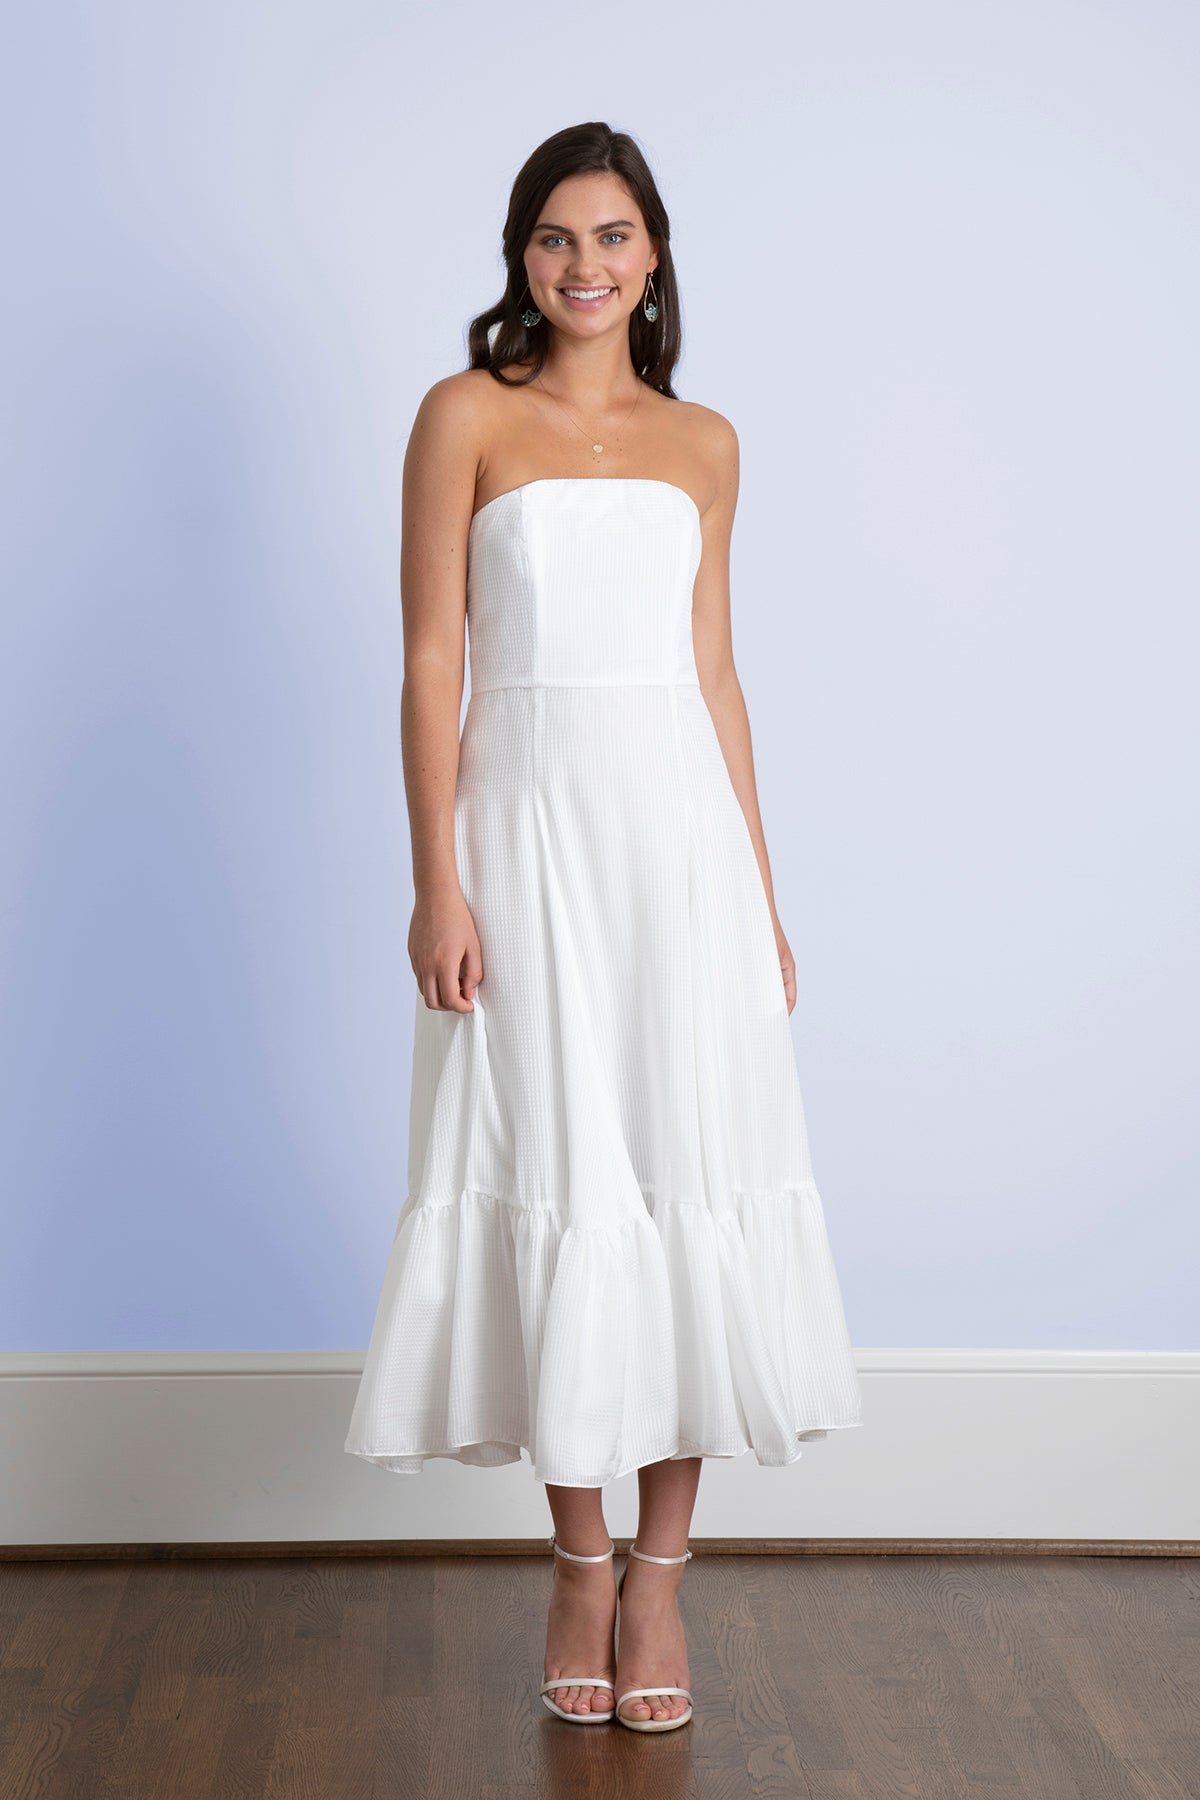 You'll Love These Unique Little White Dresses | Busbee Style